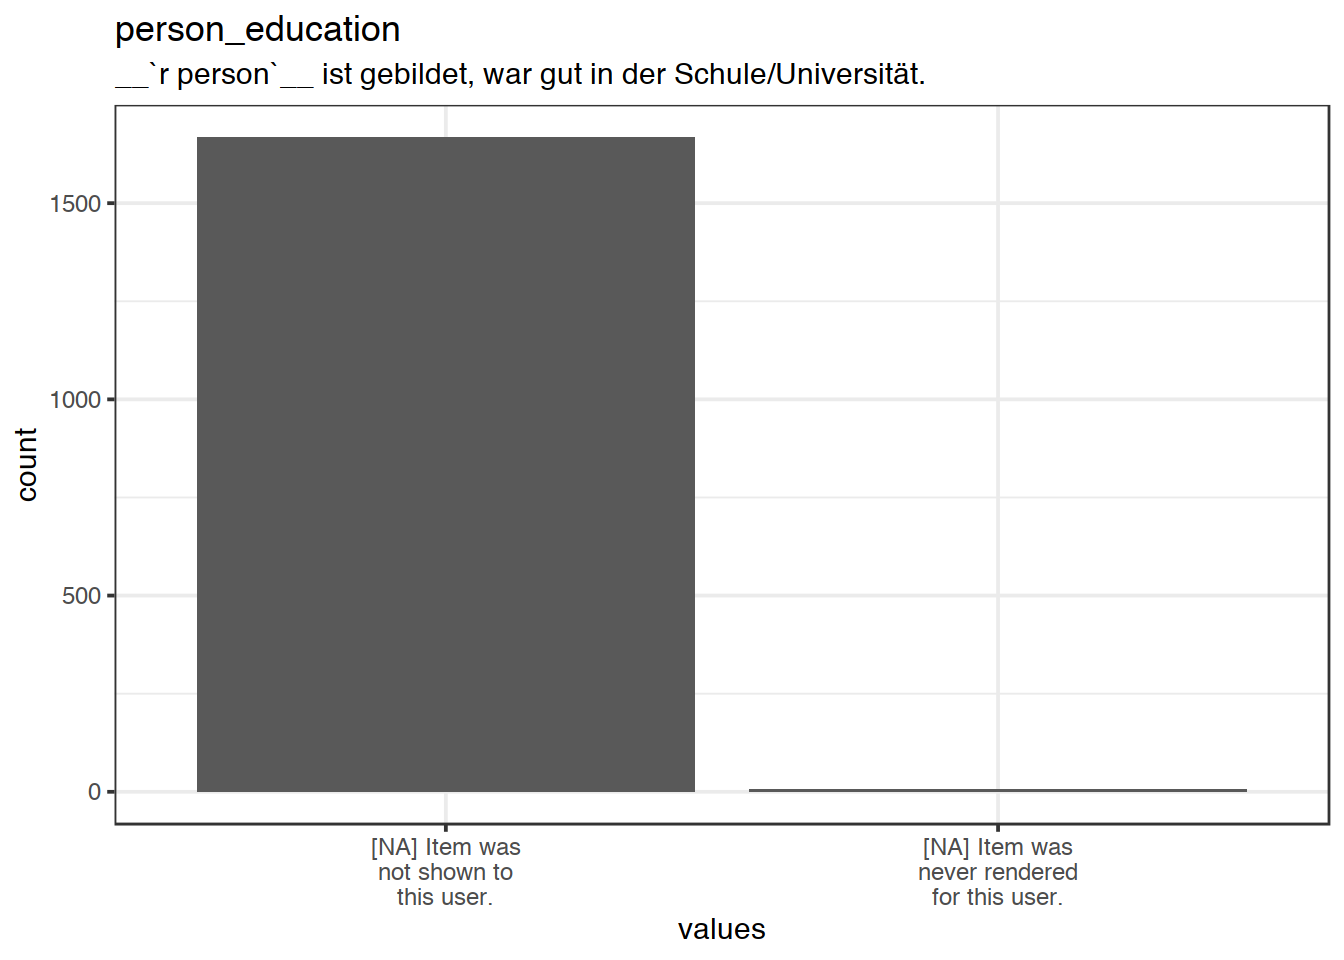 Plot of missing values for person_education